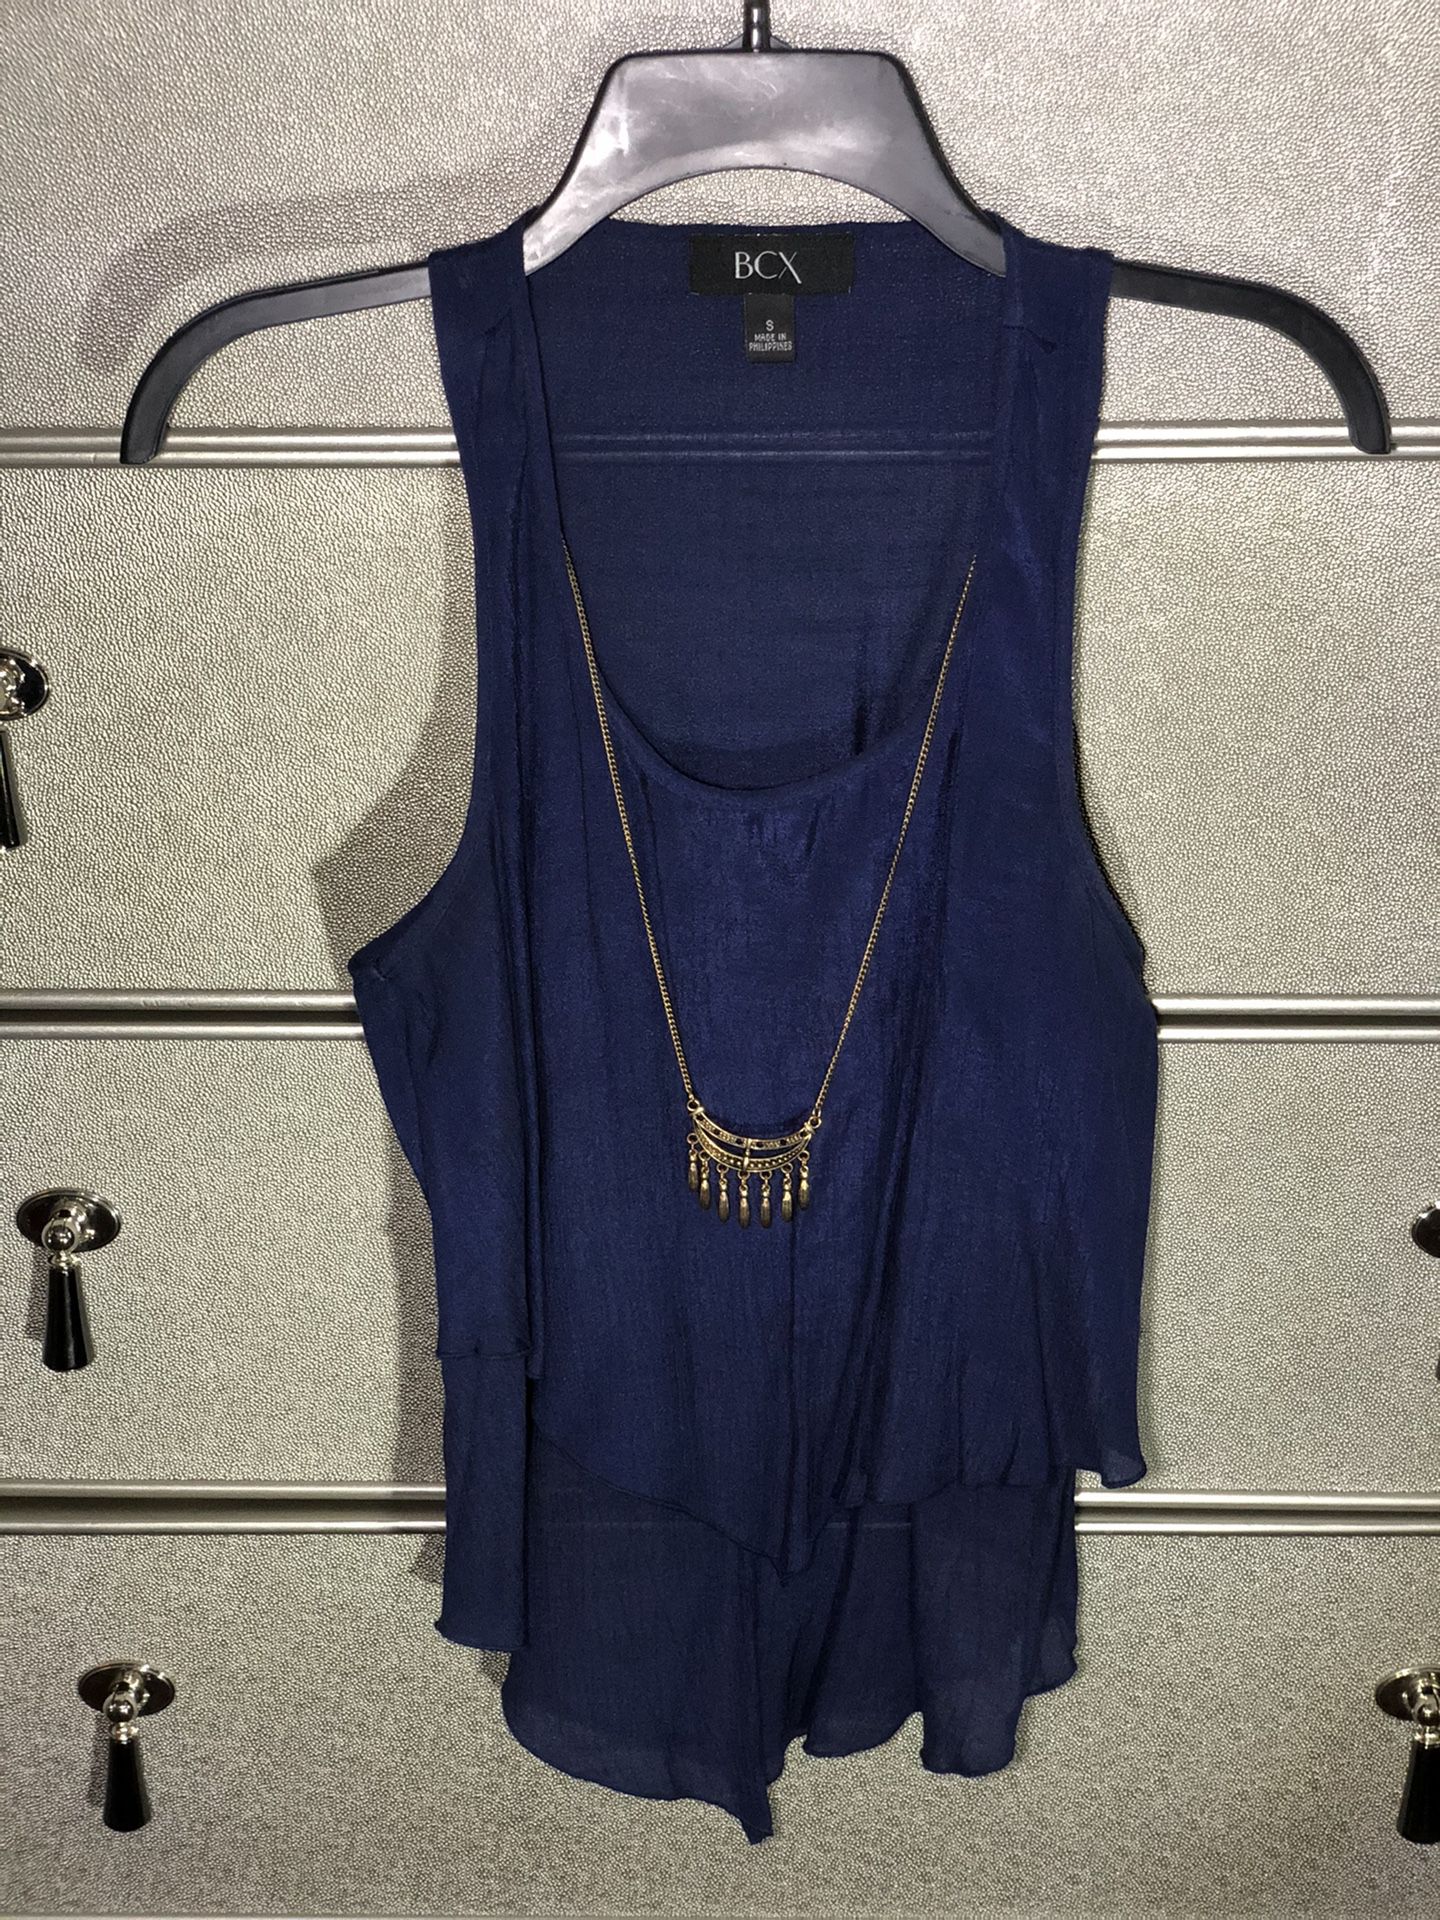 BCX Blue Top with Necklace